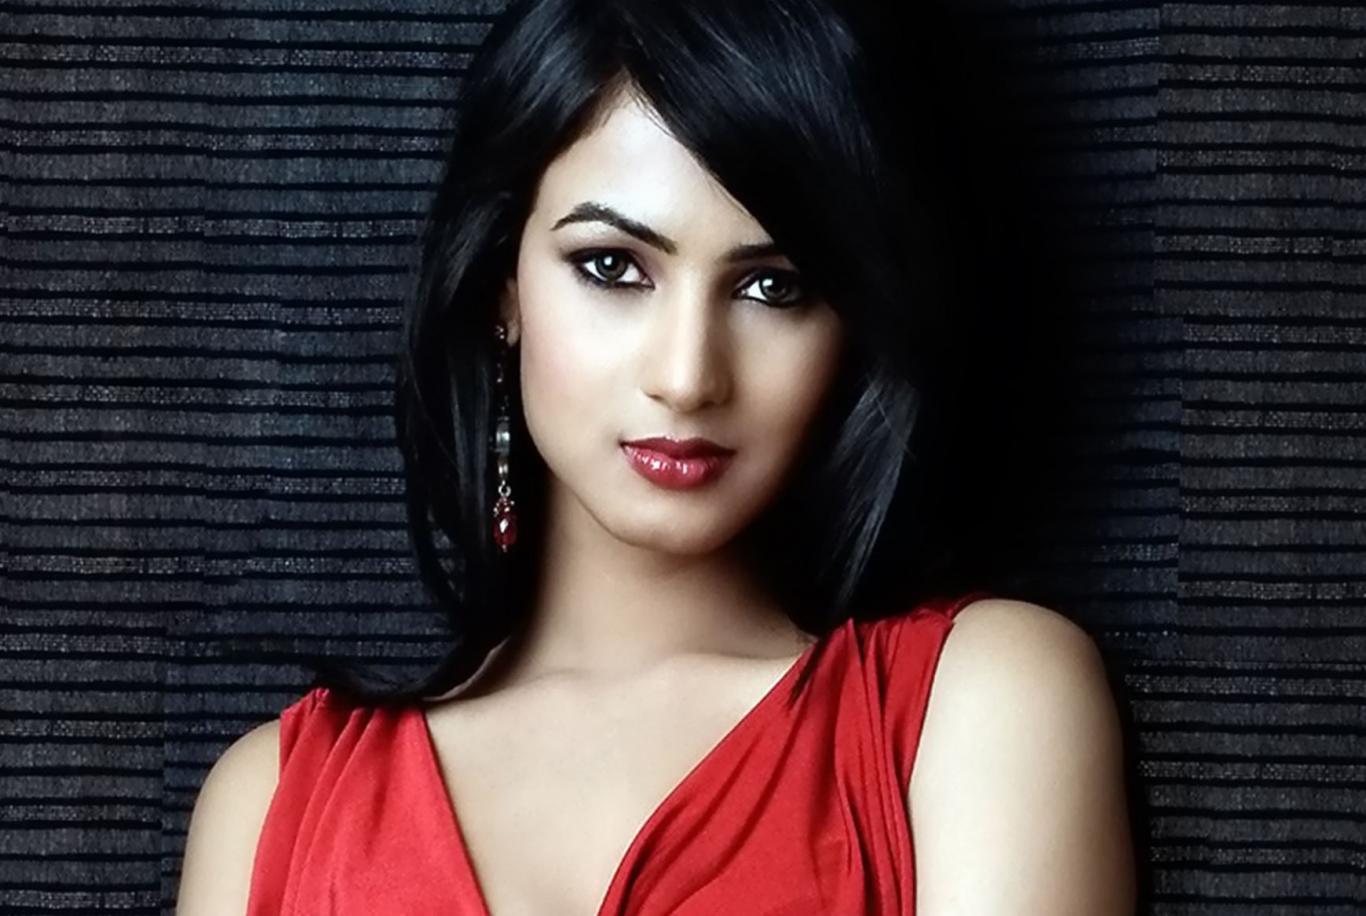 Sonal Chauhan Hot Photos Unseen Pics Images Wallpapers